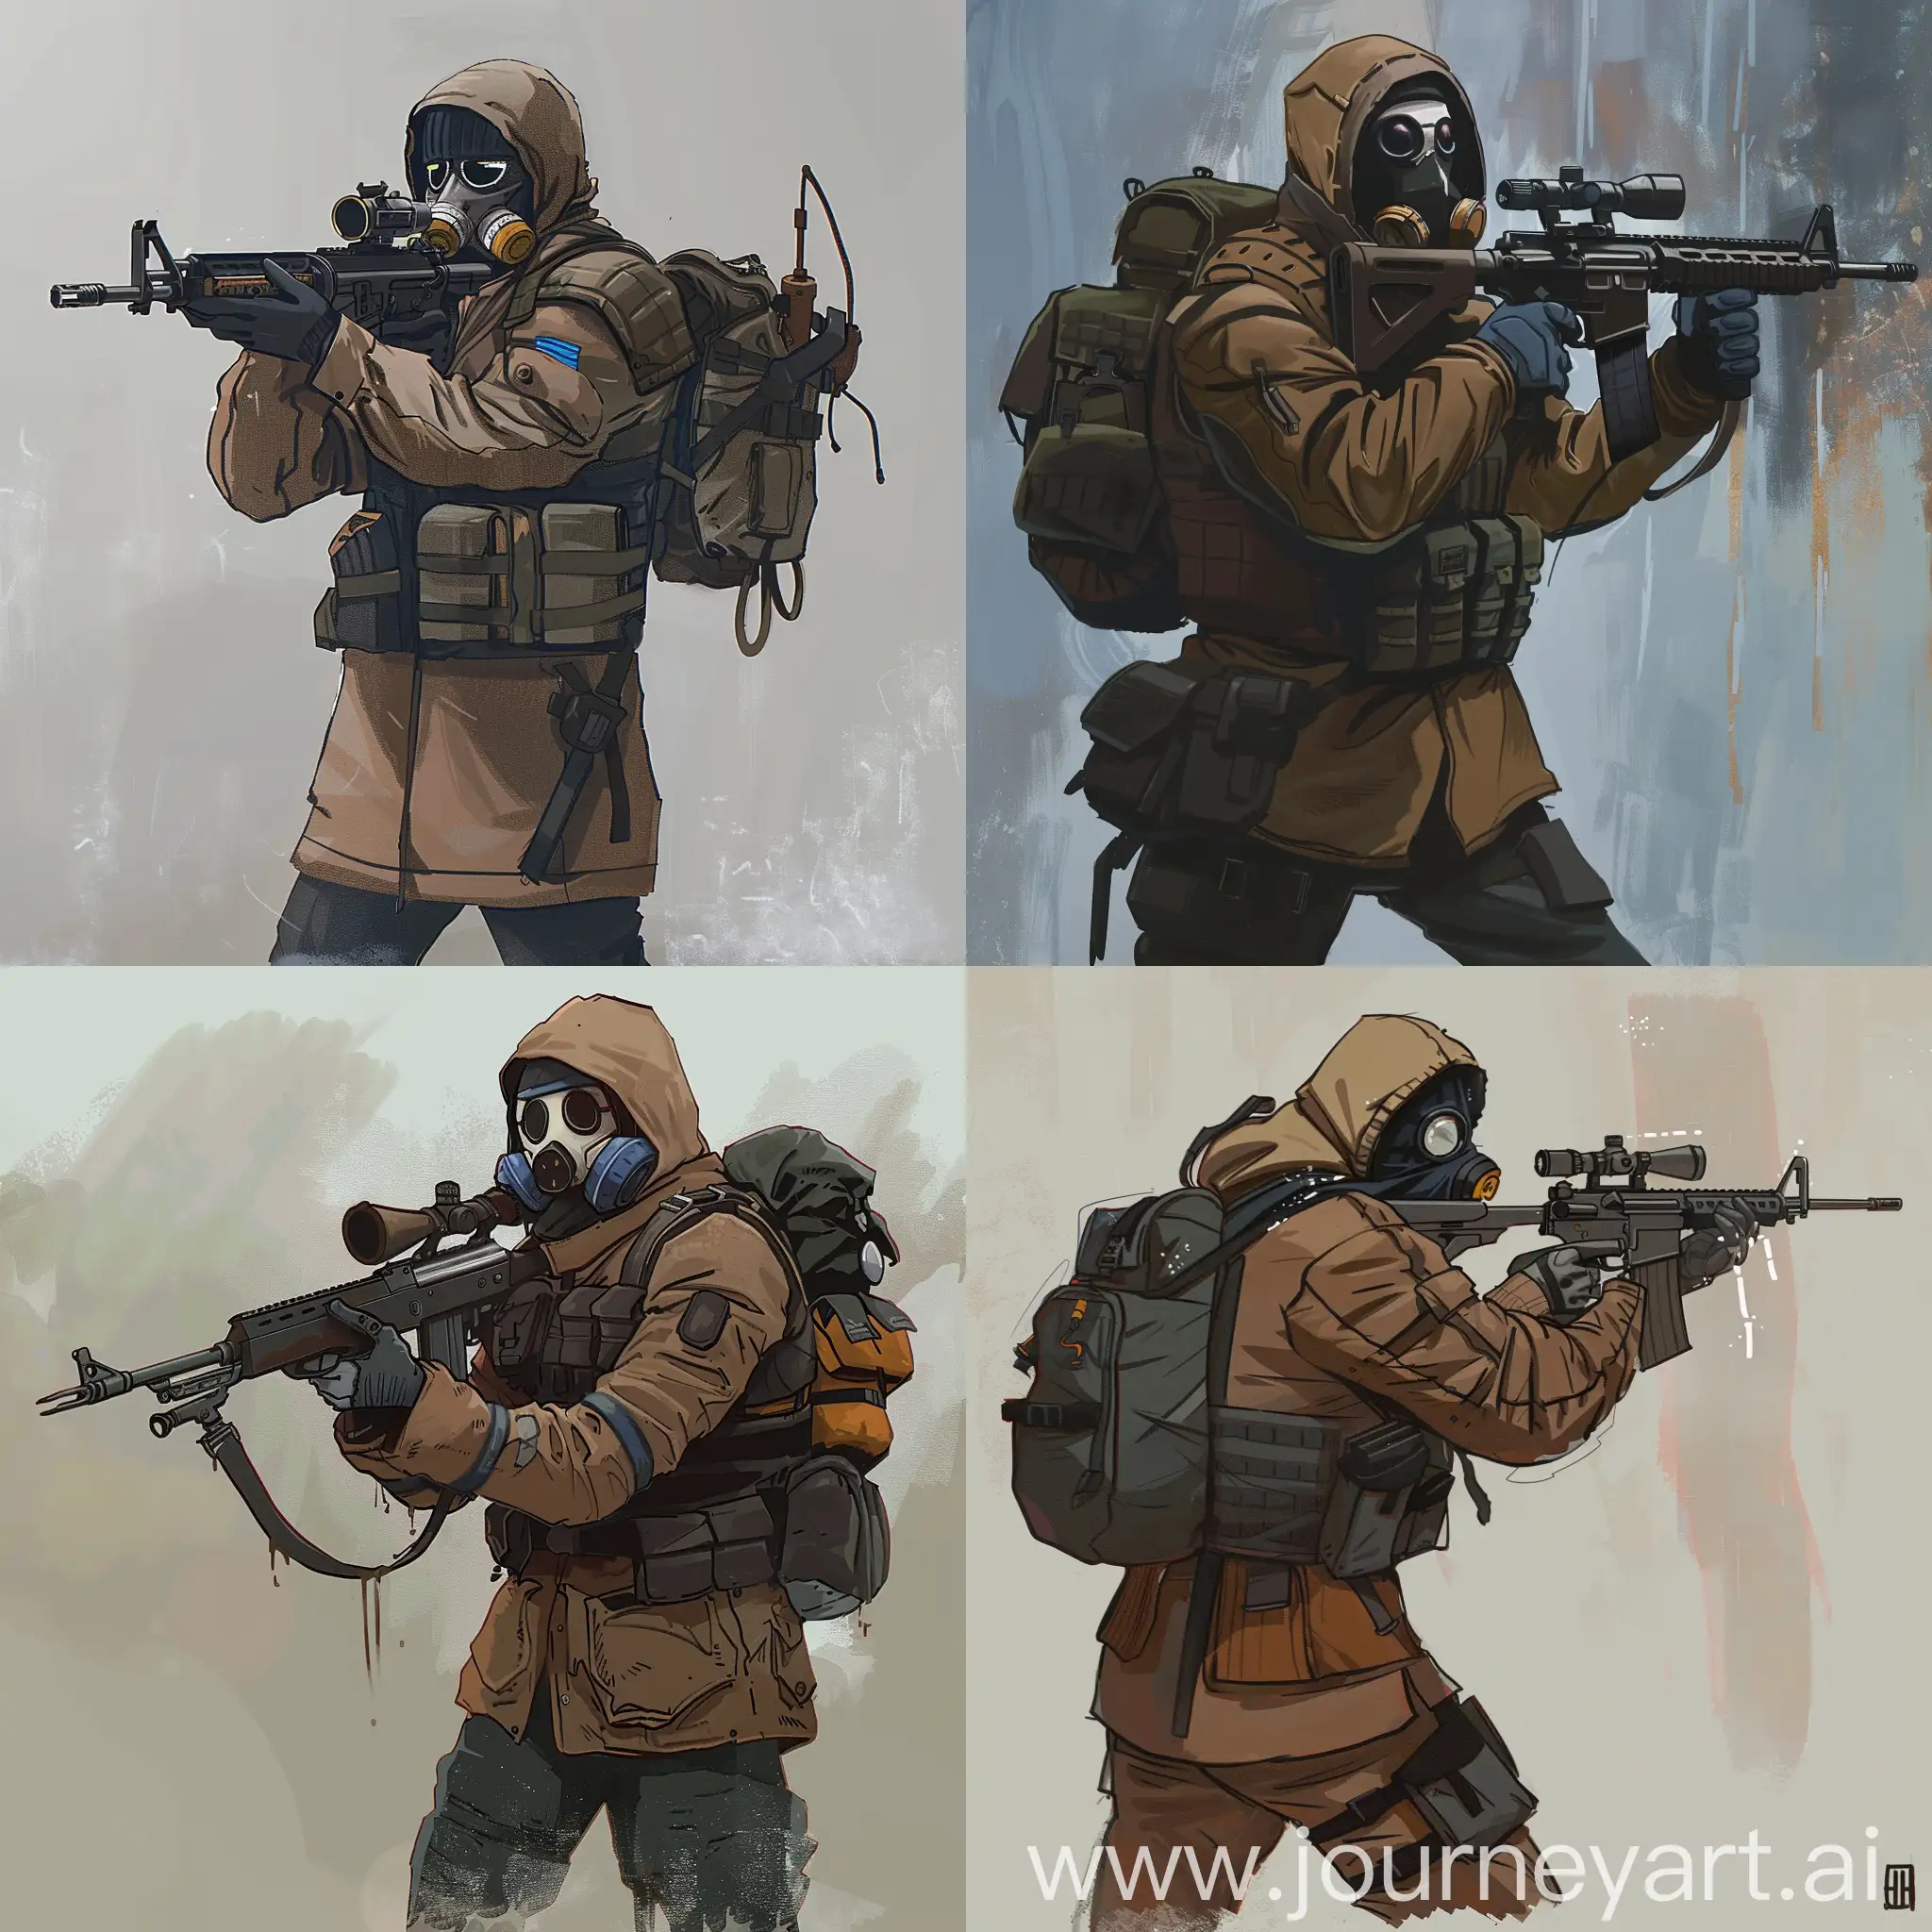 Stealthy-Sniper-Character-Concept-Art-Armed-Stalker-in-Military-Gear